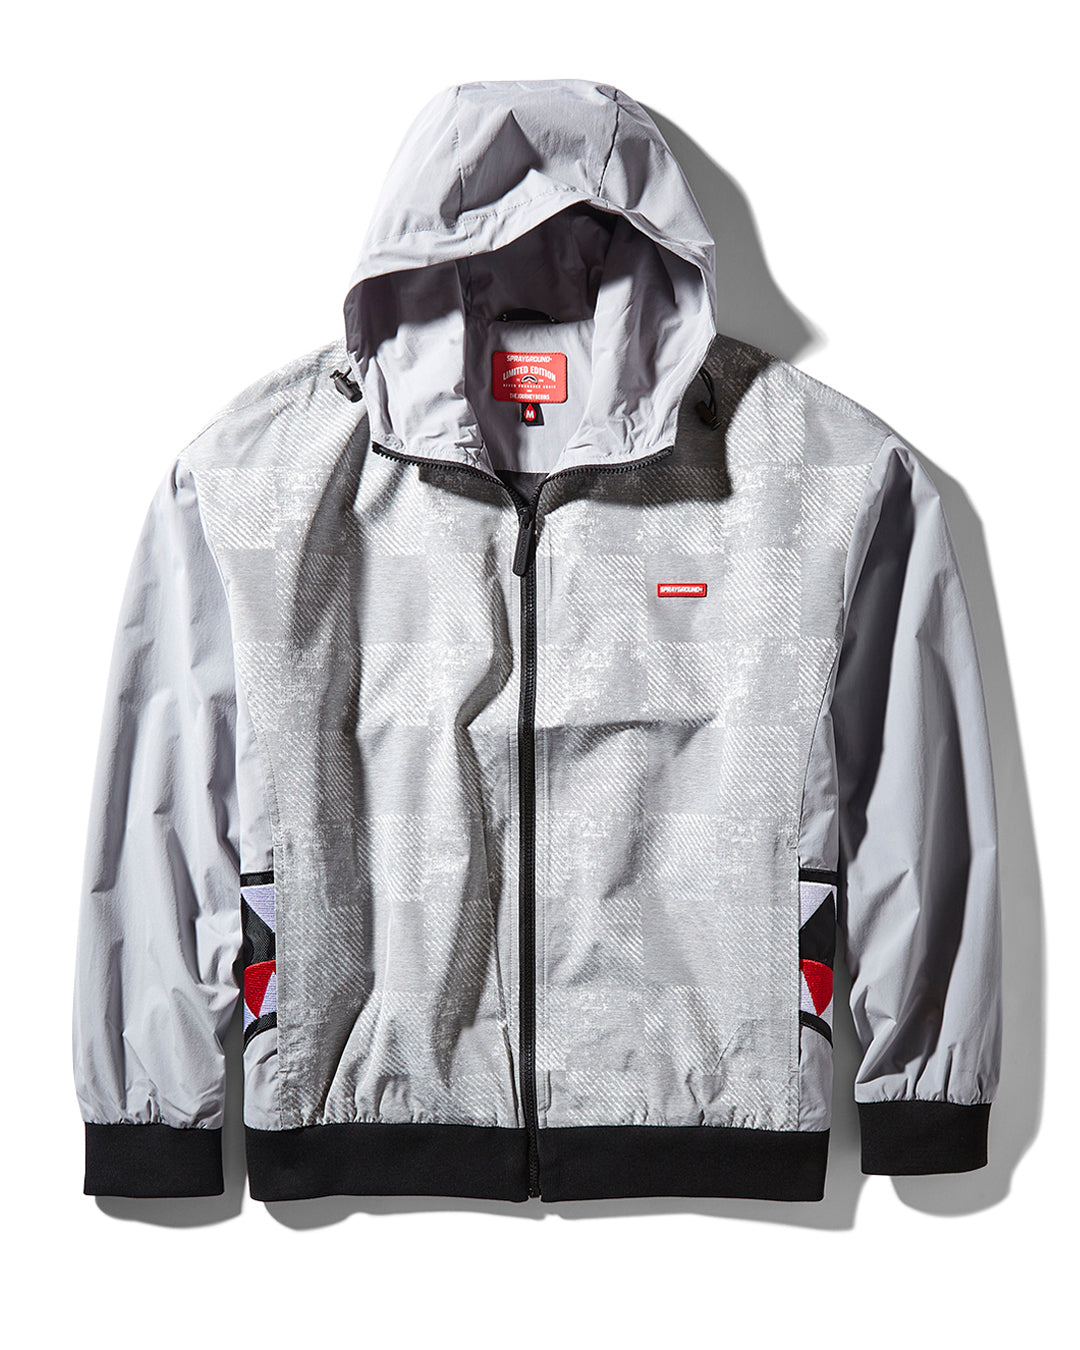 CHECKED SIDE SHARKS GREY JACKET